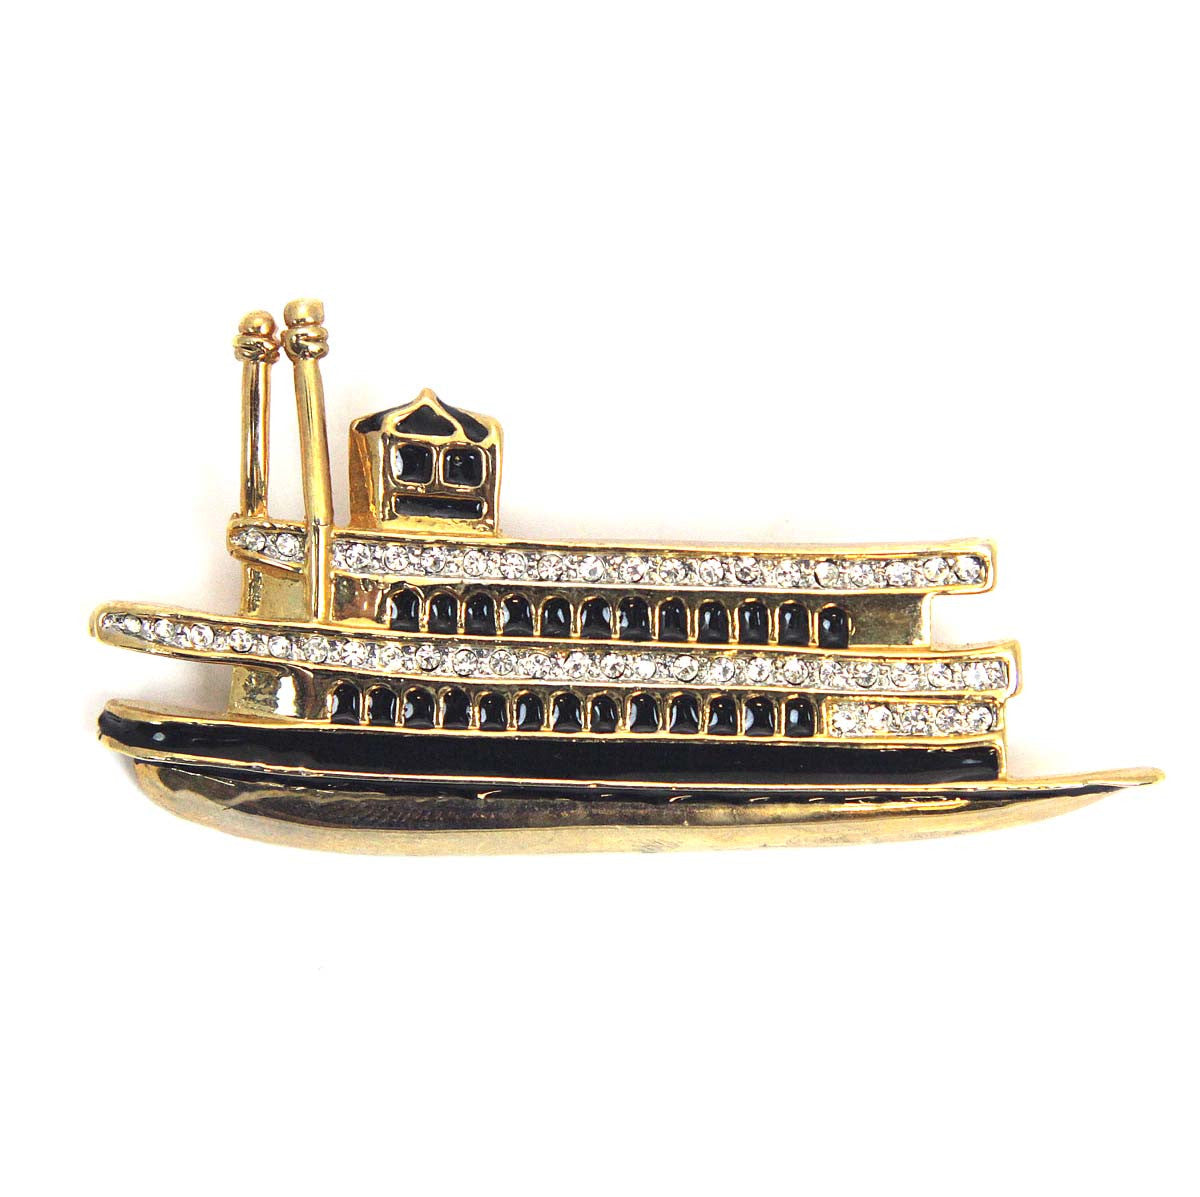 Ferry Steamboat Pin, Gold